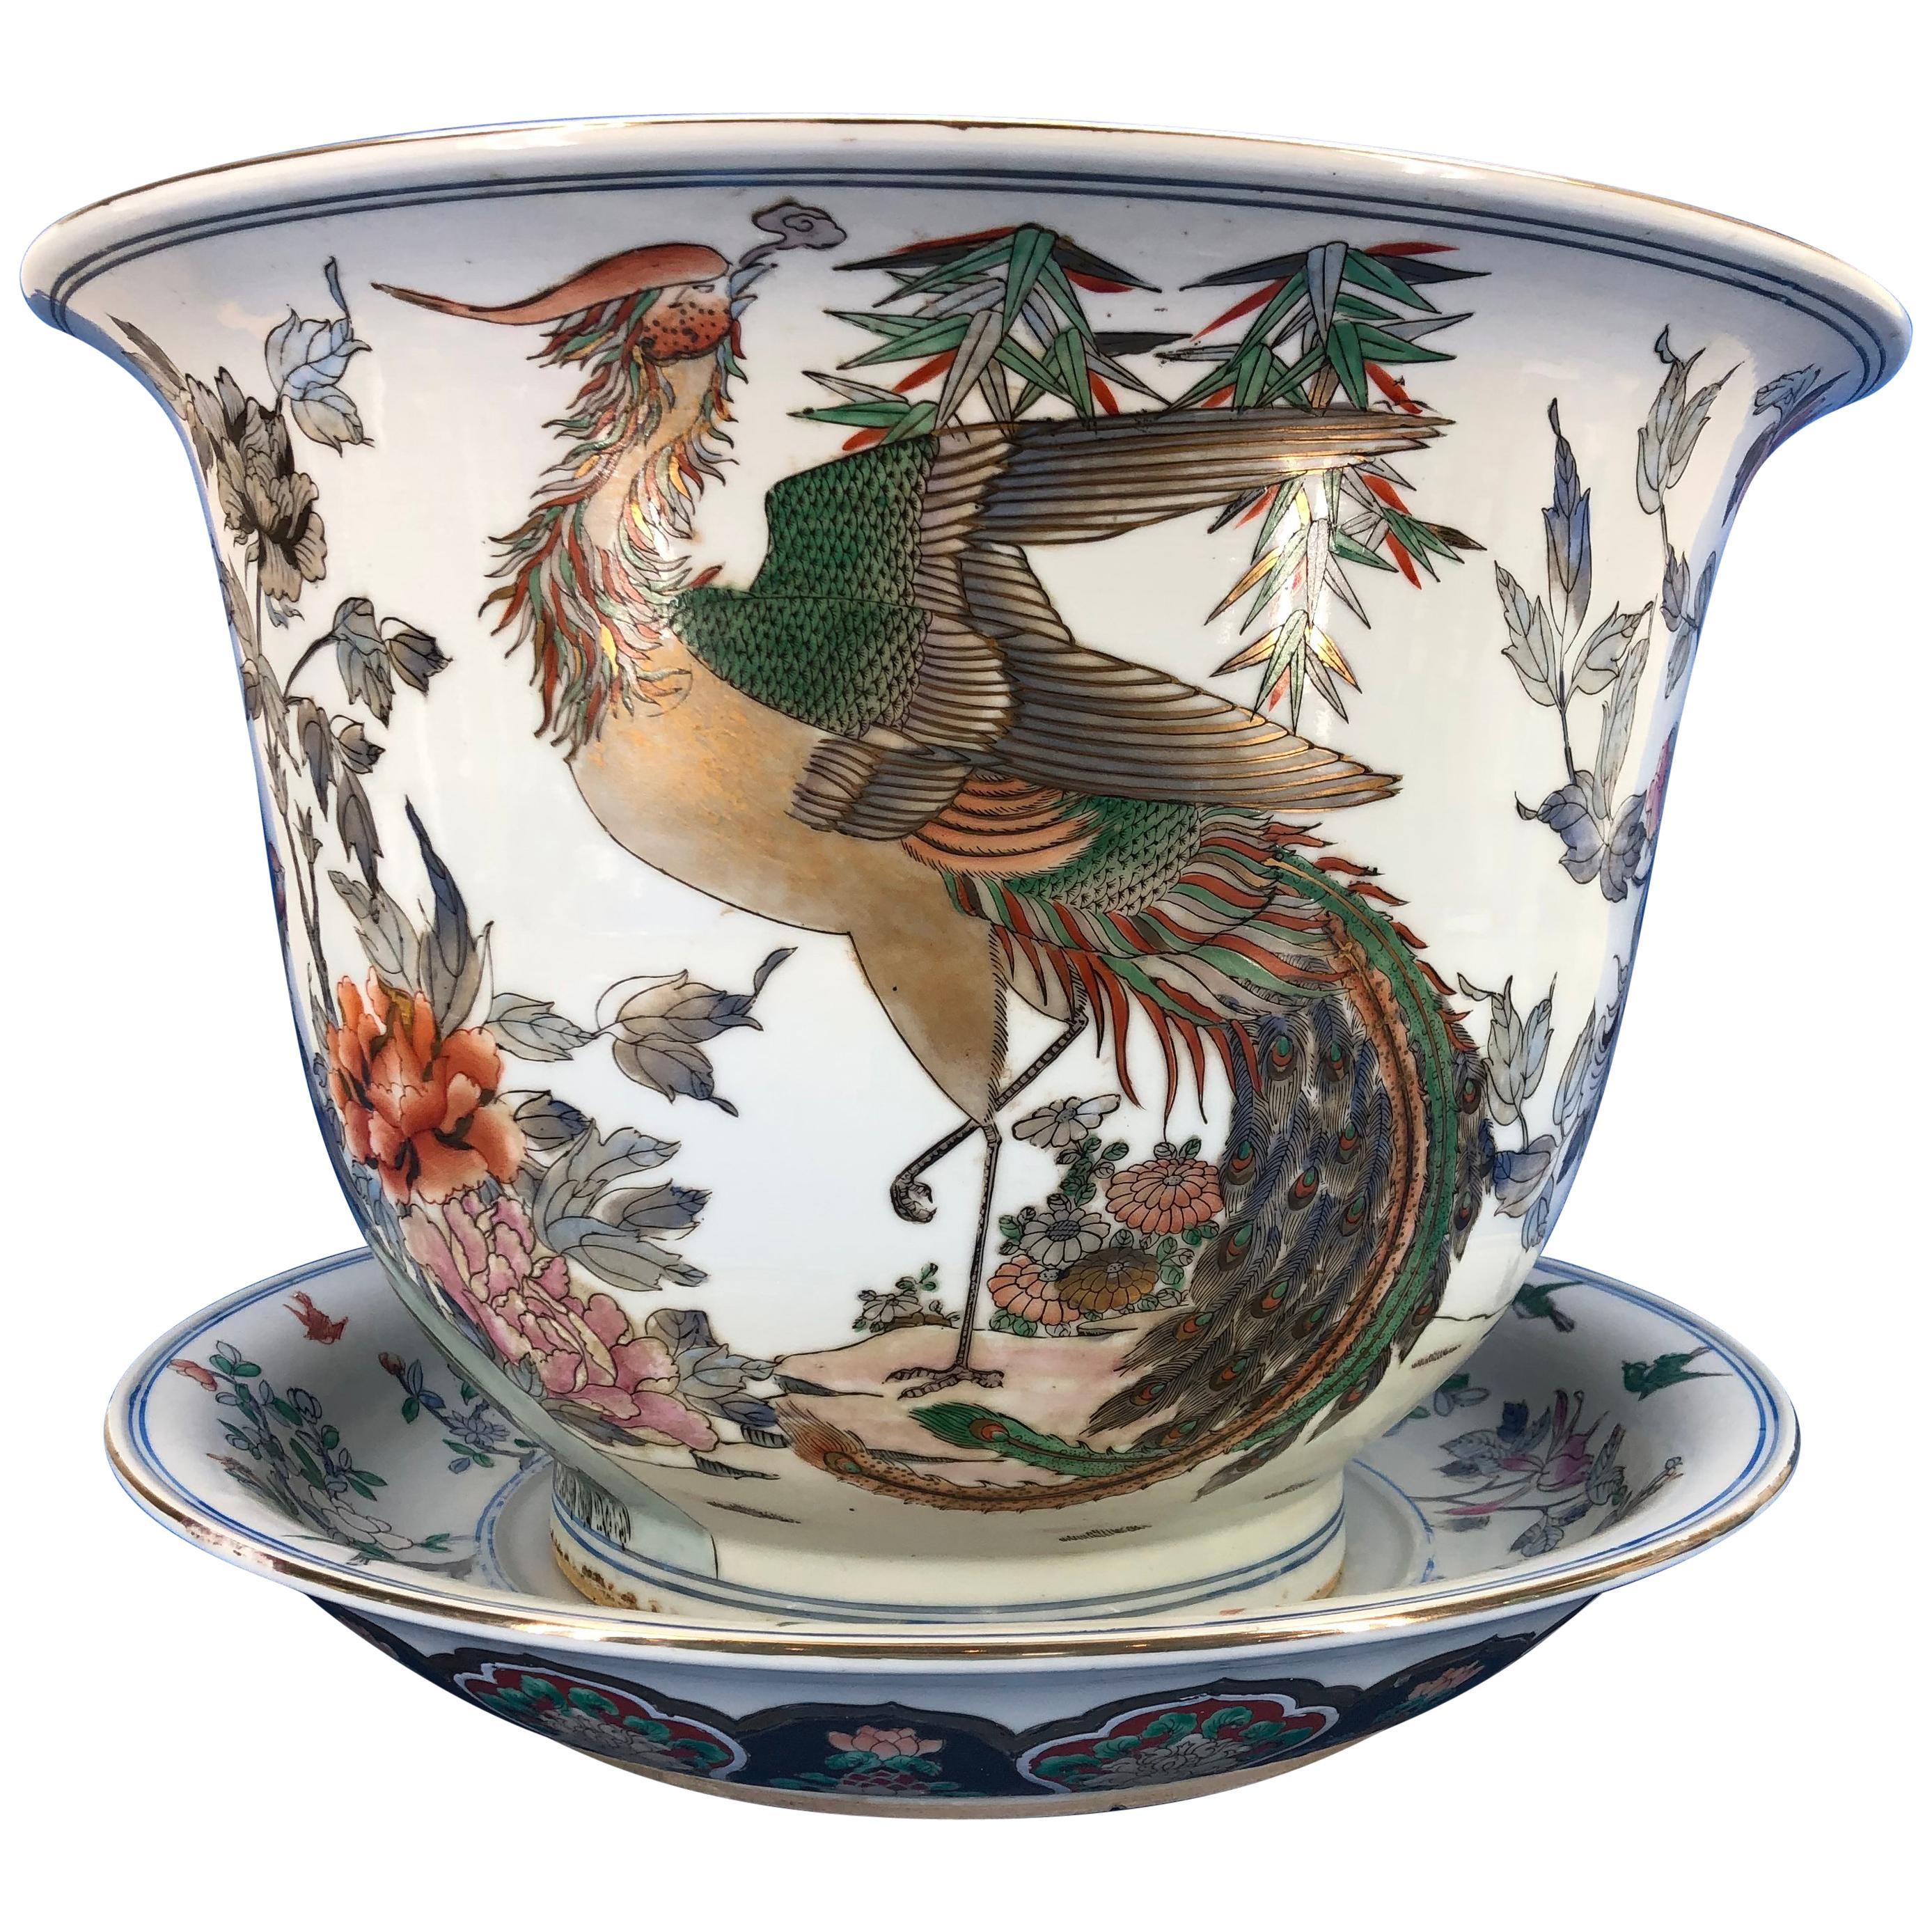 Large Chinese hand painted porcelain jardinière urn and charger

Porcelain is decorated with beautiful scenes of cranes, birds, flowers and acanthus leaves. Colors are green, red, orange, gold and blue.